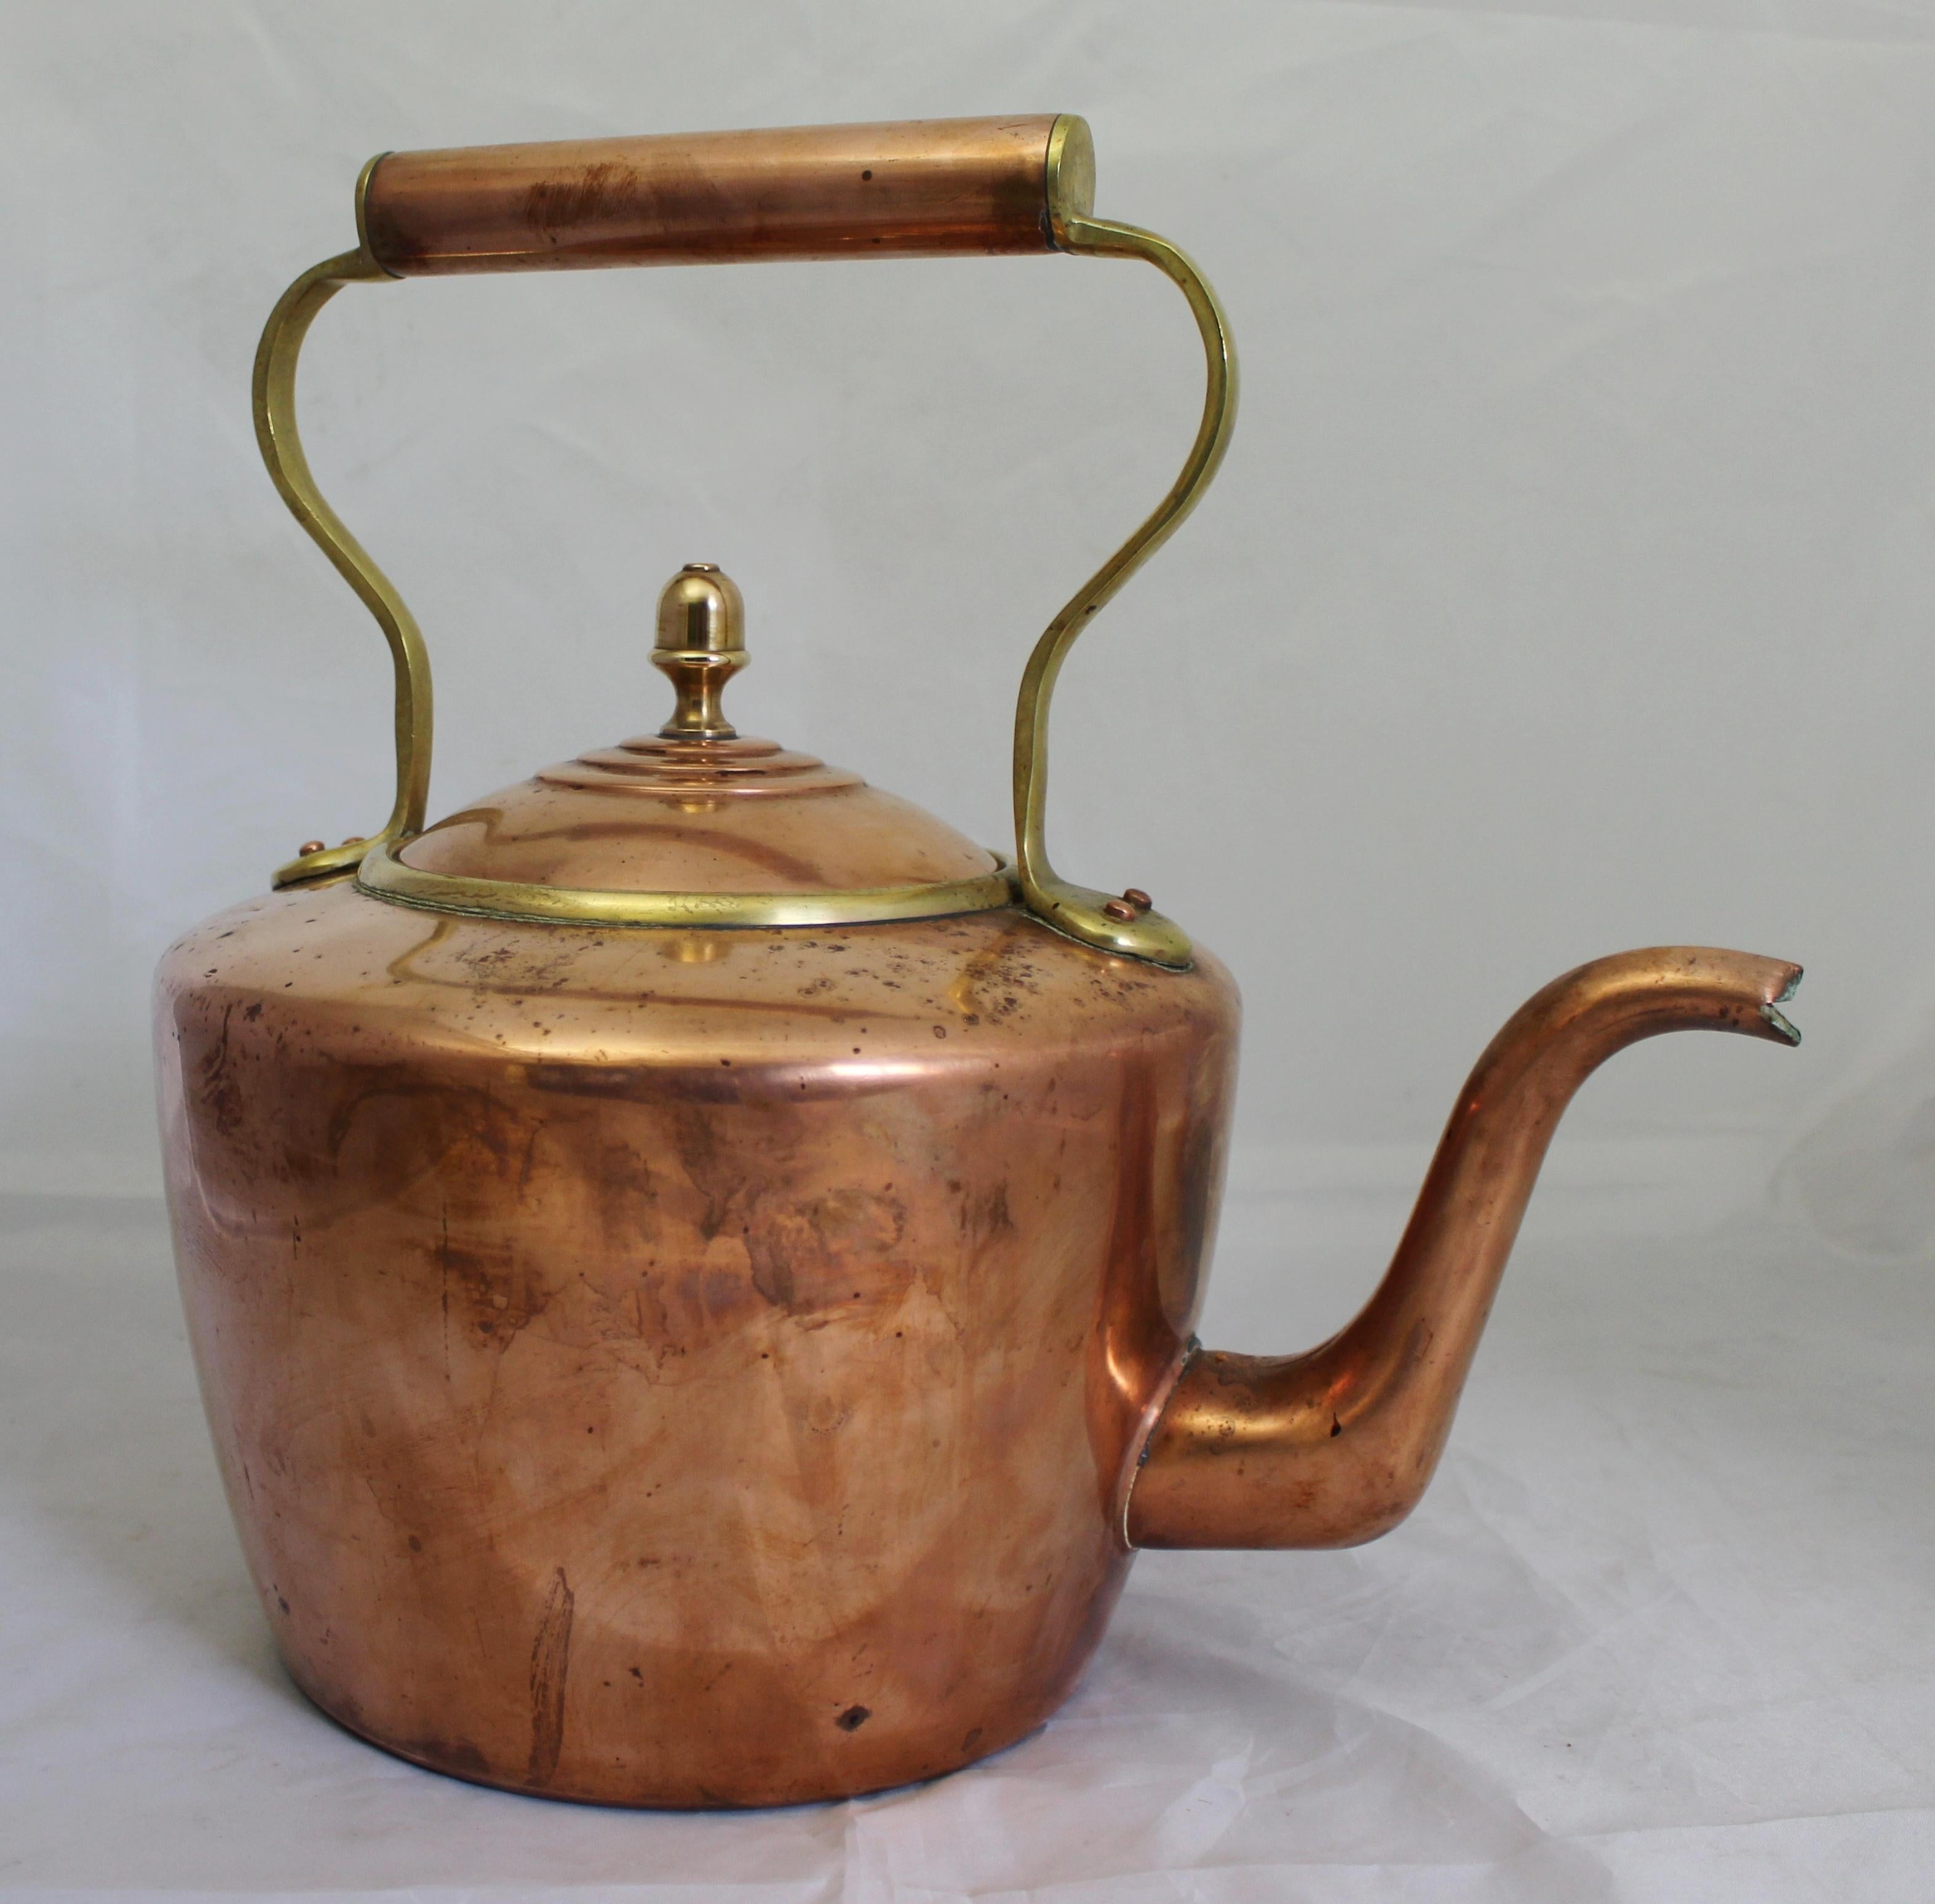 Period English, early 19th century.
Measure: Width 31 cm / 12 1/4 in
Depth 21 cm / 8 1/4 in
Height 30 / 11 3/4 in
Condition very good original condition. Wear commensurate with age.




Fine quality copper and brass antique English lidded